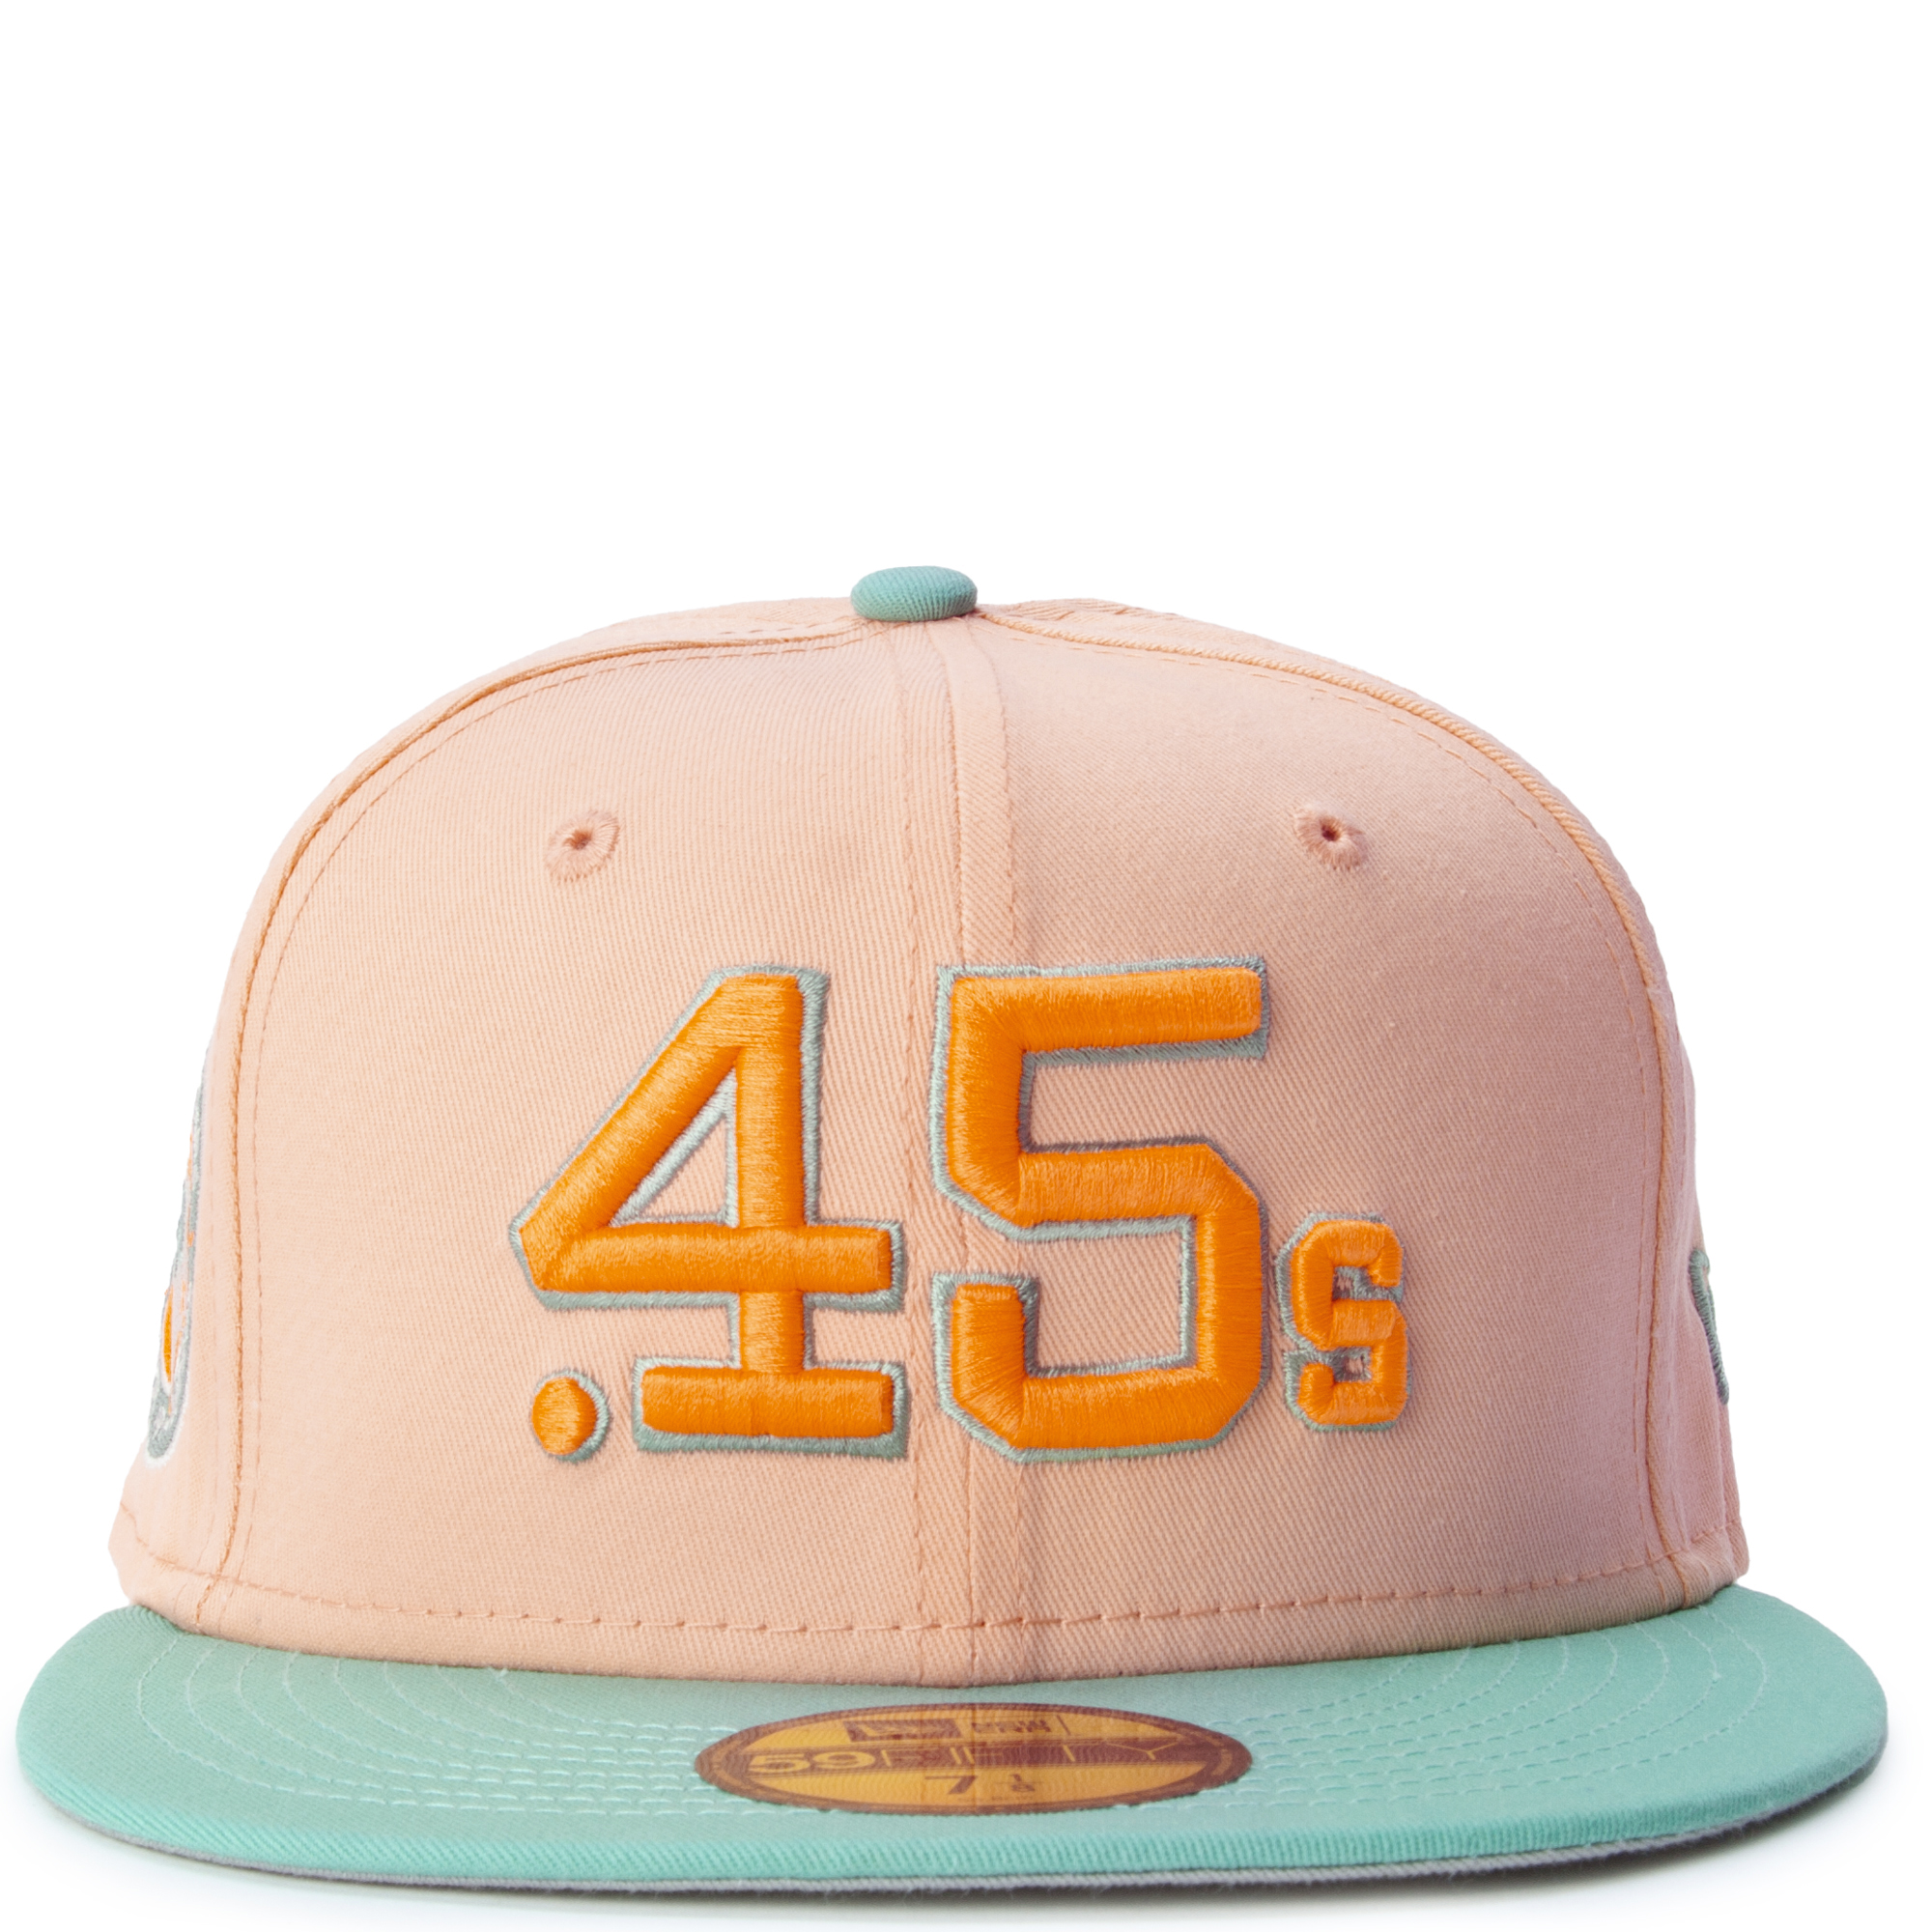 NEW ERA CAPS Miami Marlins Peach Mint 59FIFTY Fitted Hat 70725297  Shiekh